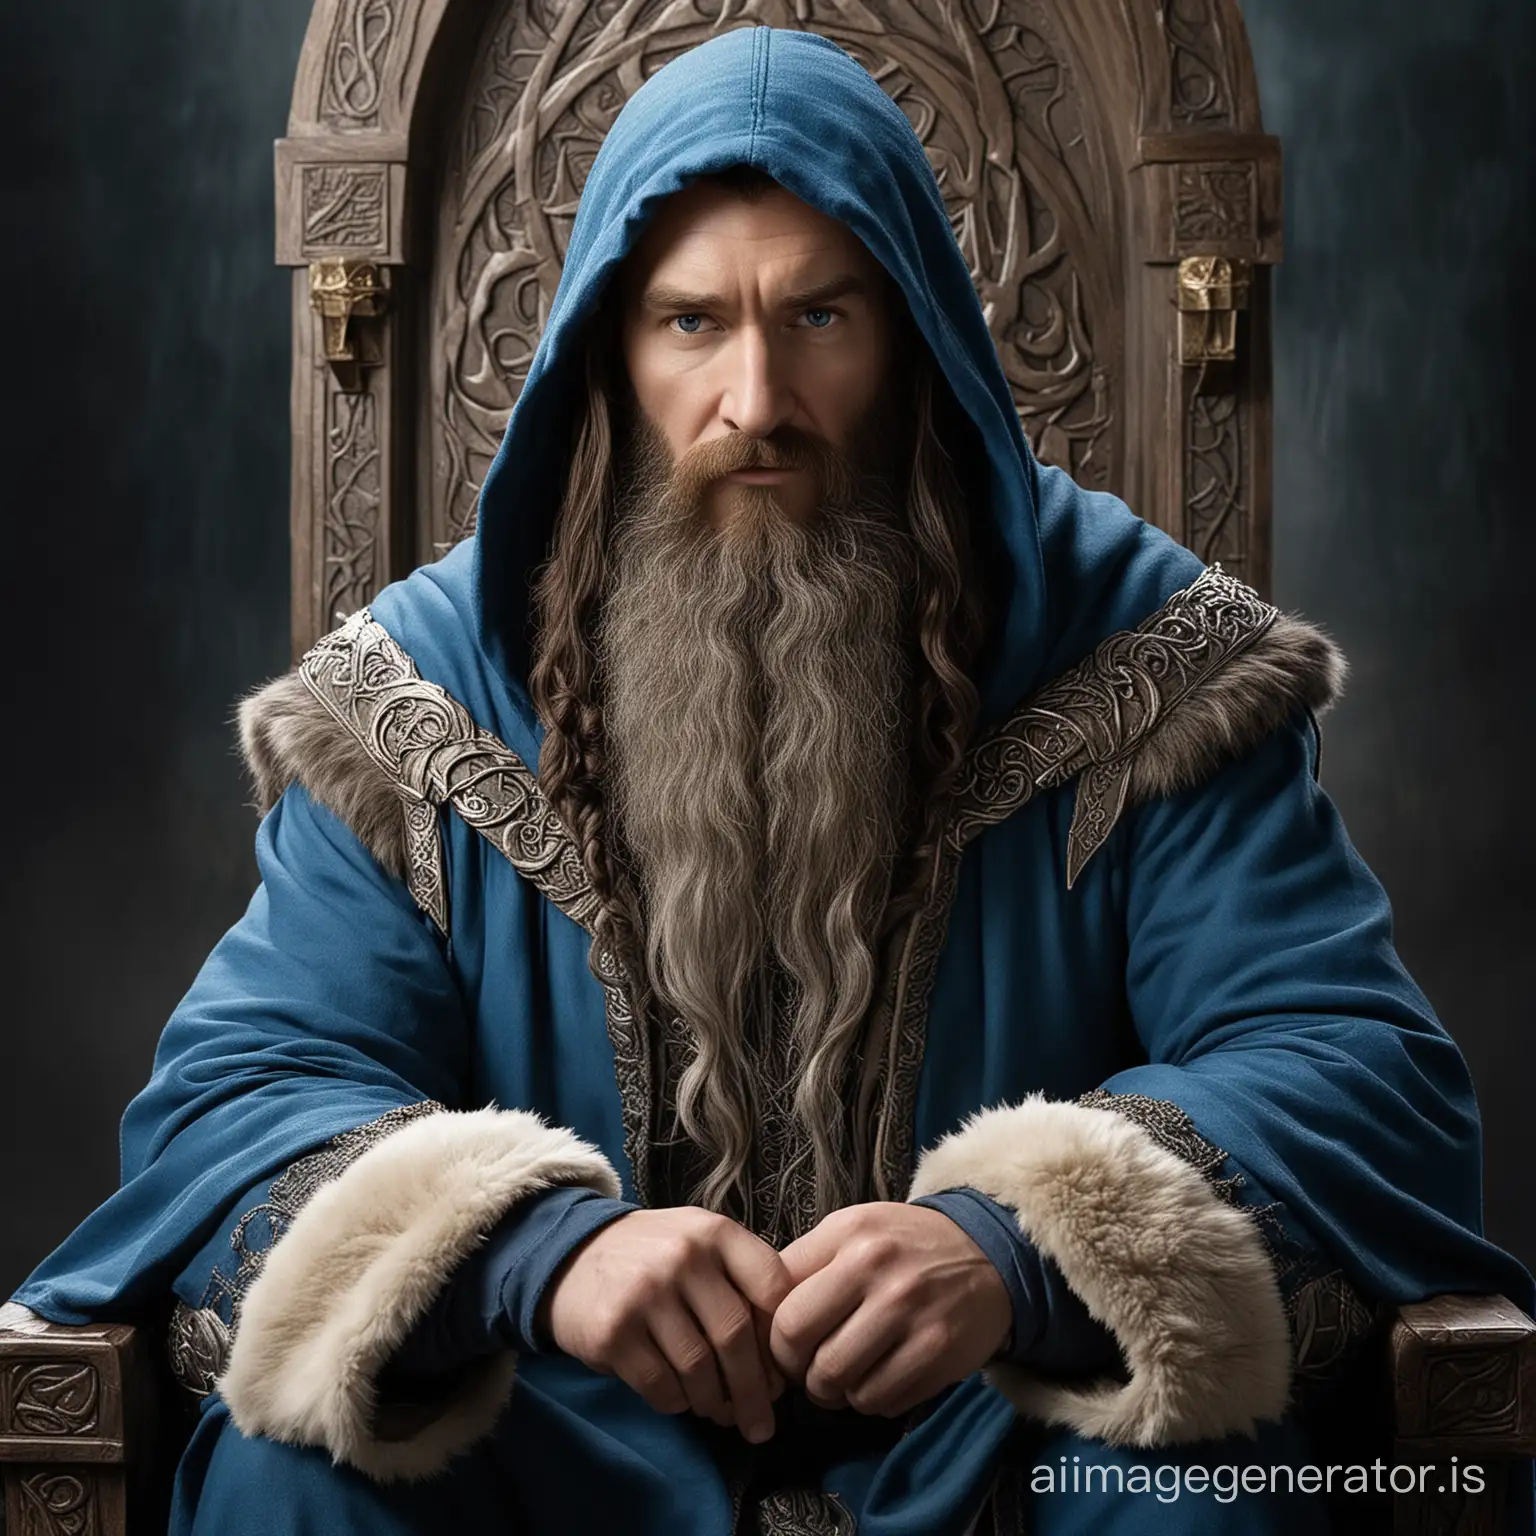 Thorin from the Hobbit sitting on a mighty throne. He wears a blue hood. His beard is white. His armor is golden. Thorin Oakenshield. The Hobbit. Dwarf